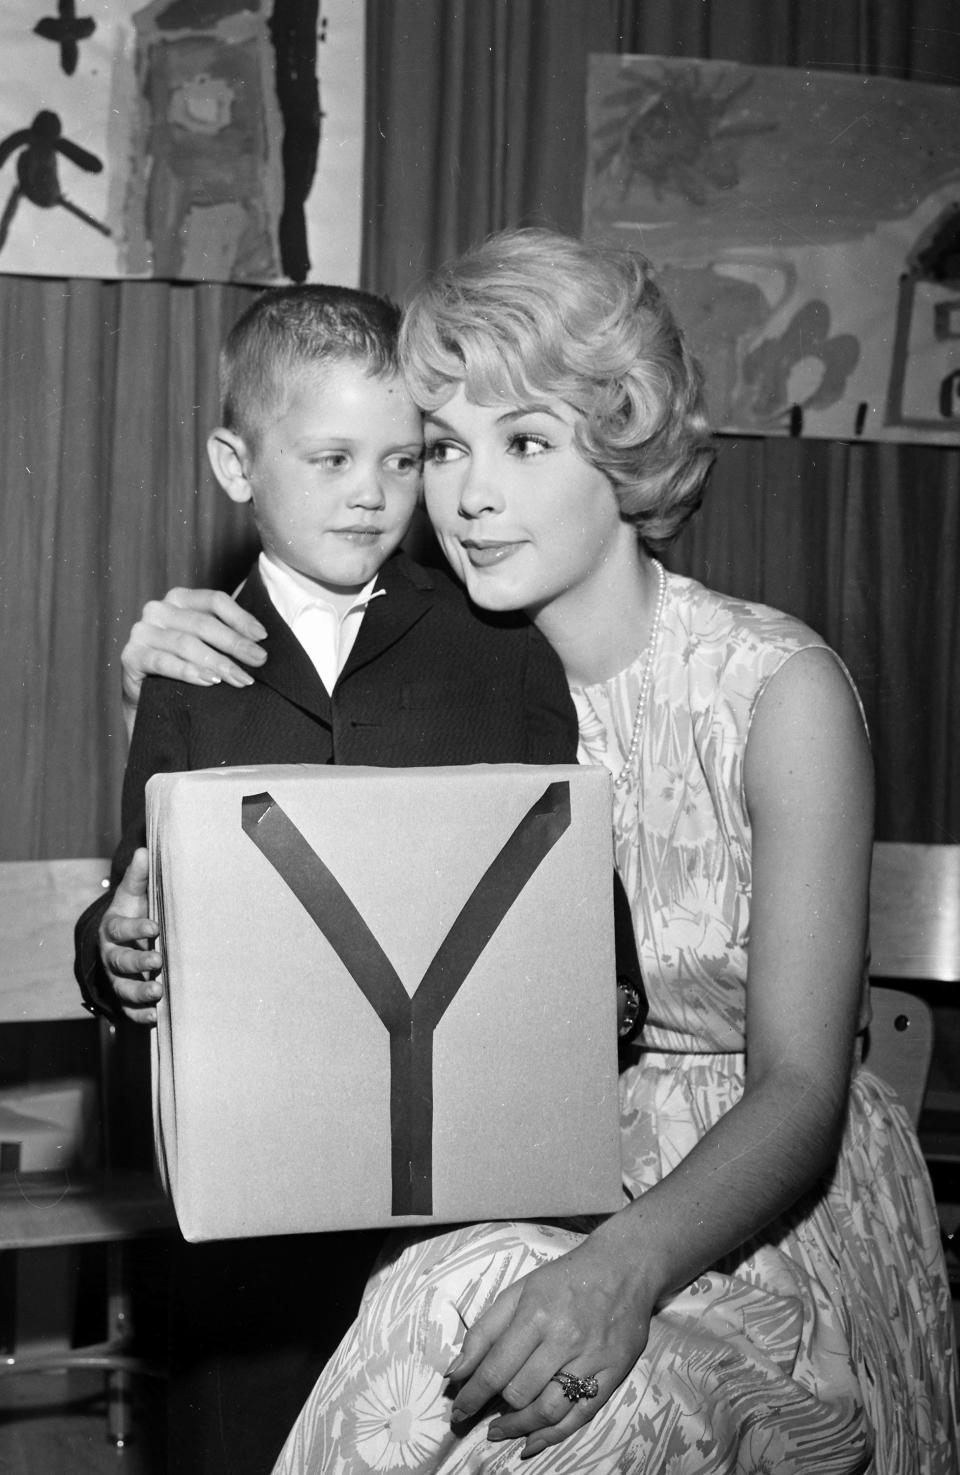 Tiny Andy - the future actor/director Andrew Stevens - gets a hug from his movie star mother, Stella Stevens, after his performance in a play at Holy Rosary School on May 30, 1961.